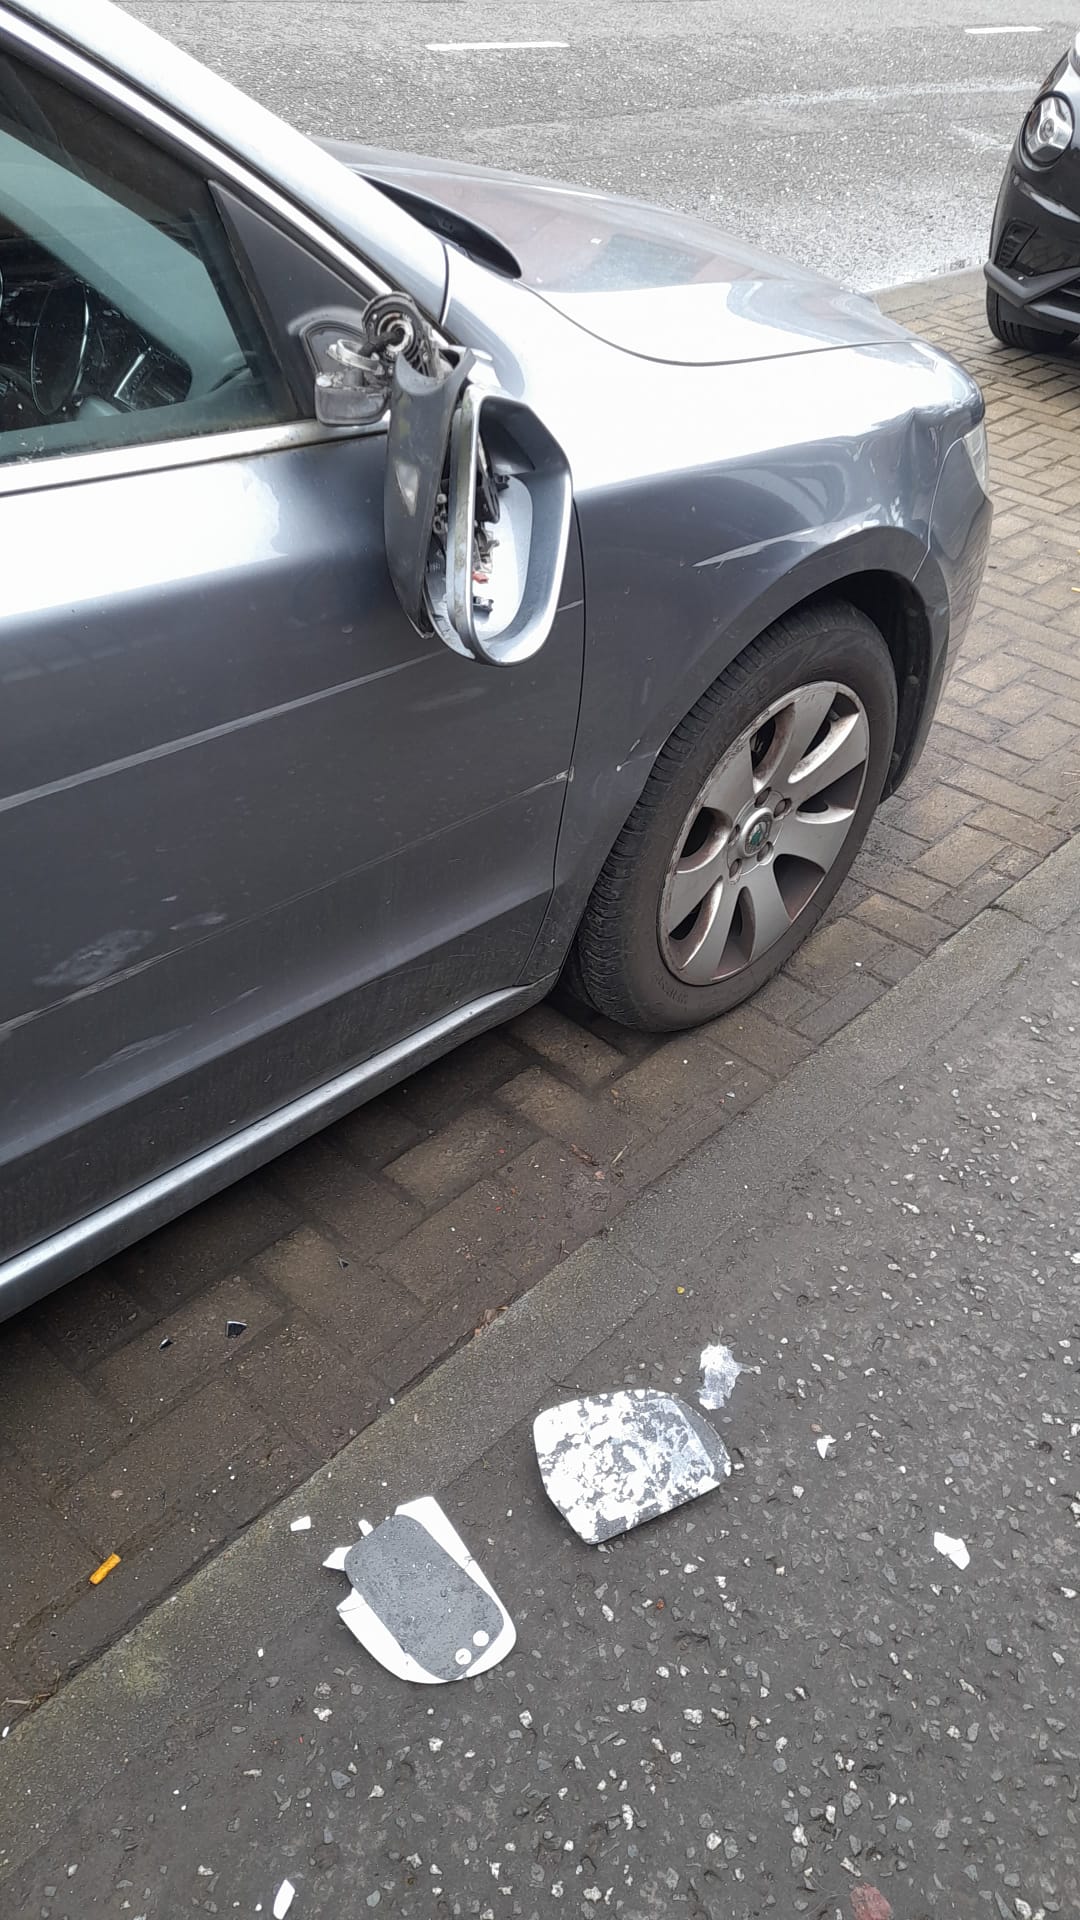 HATE CRIME: The damage to the car was discovered on Saturday morning